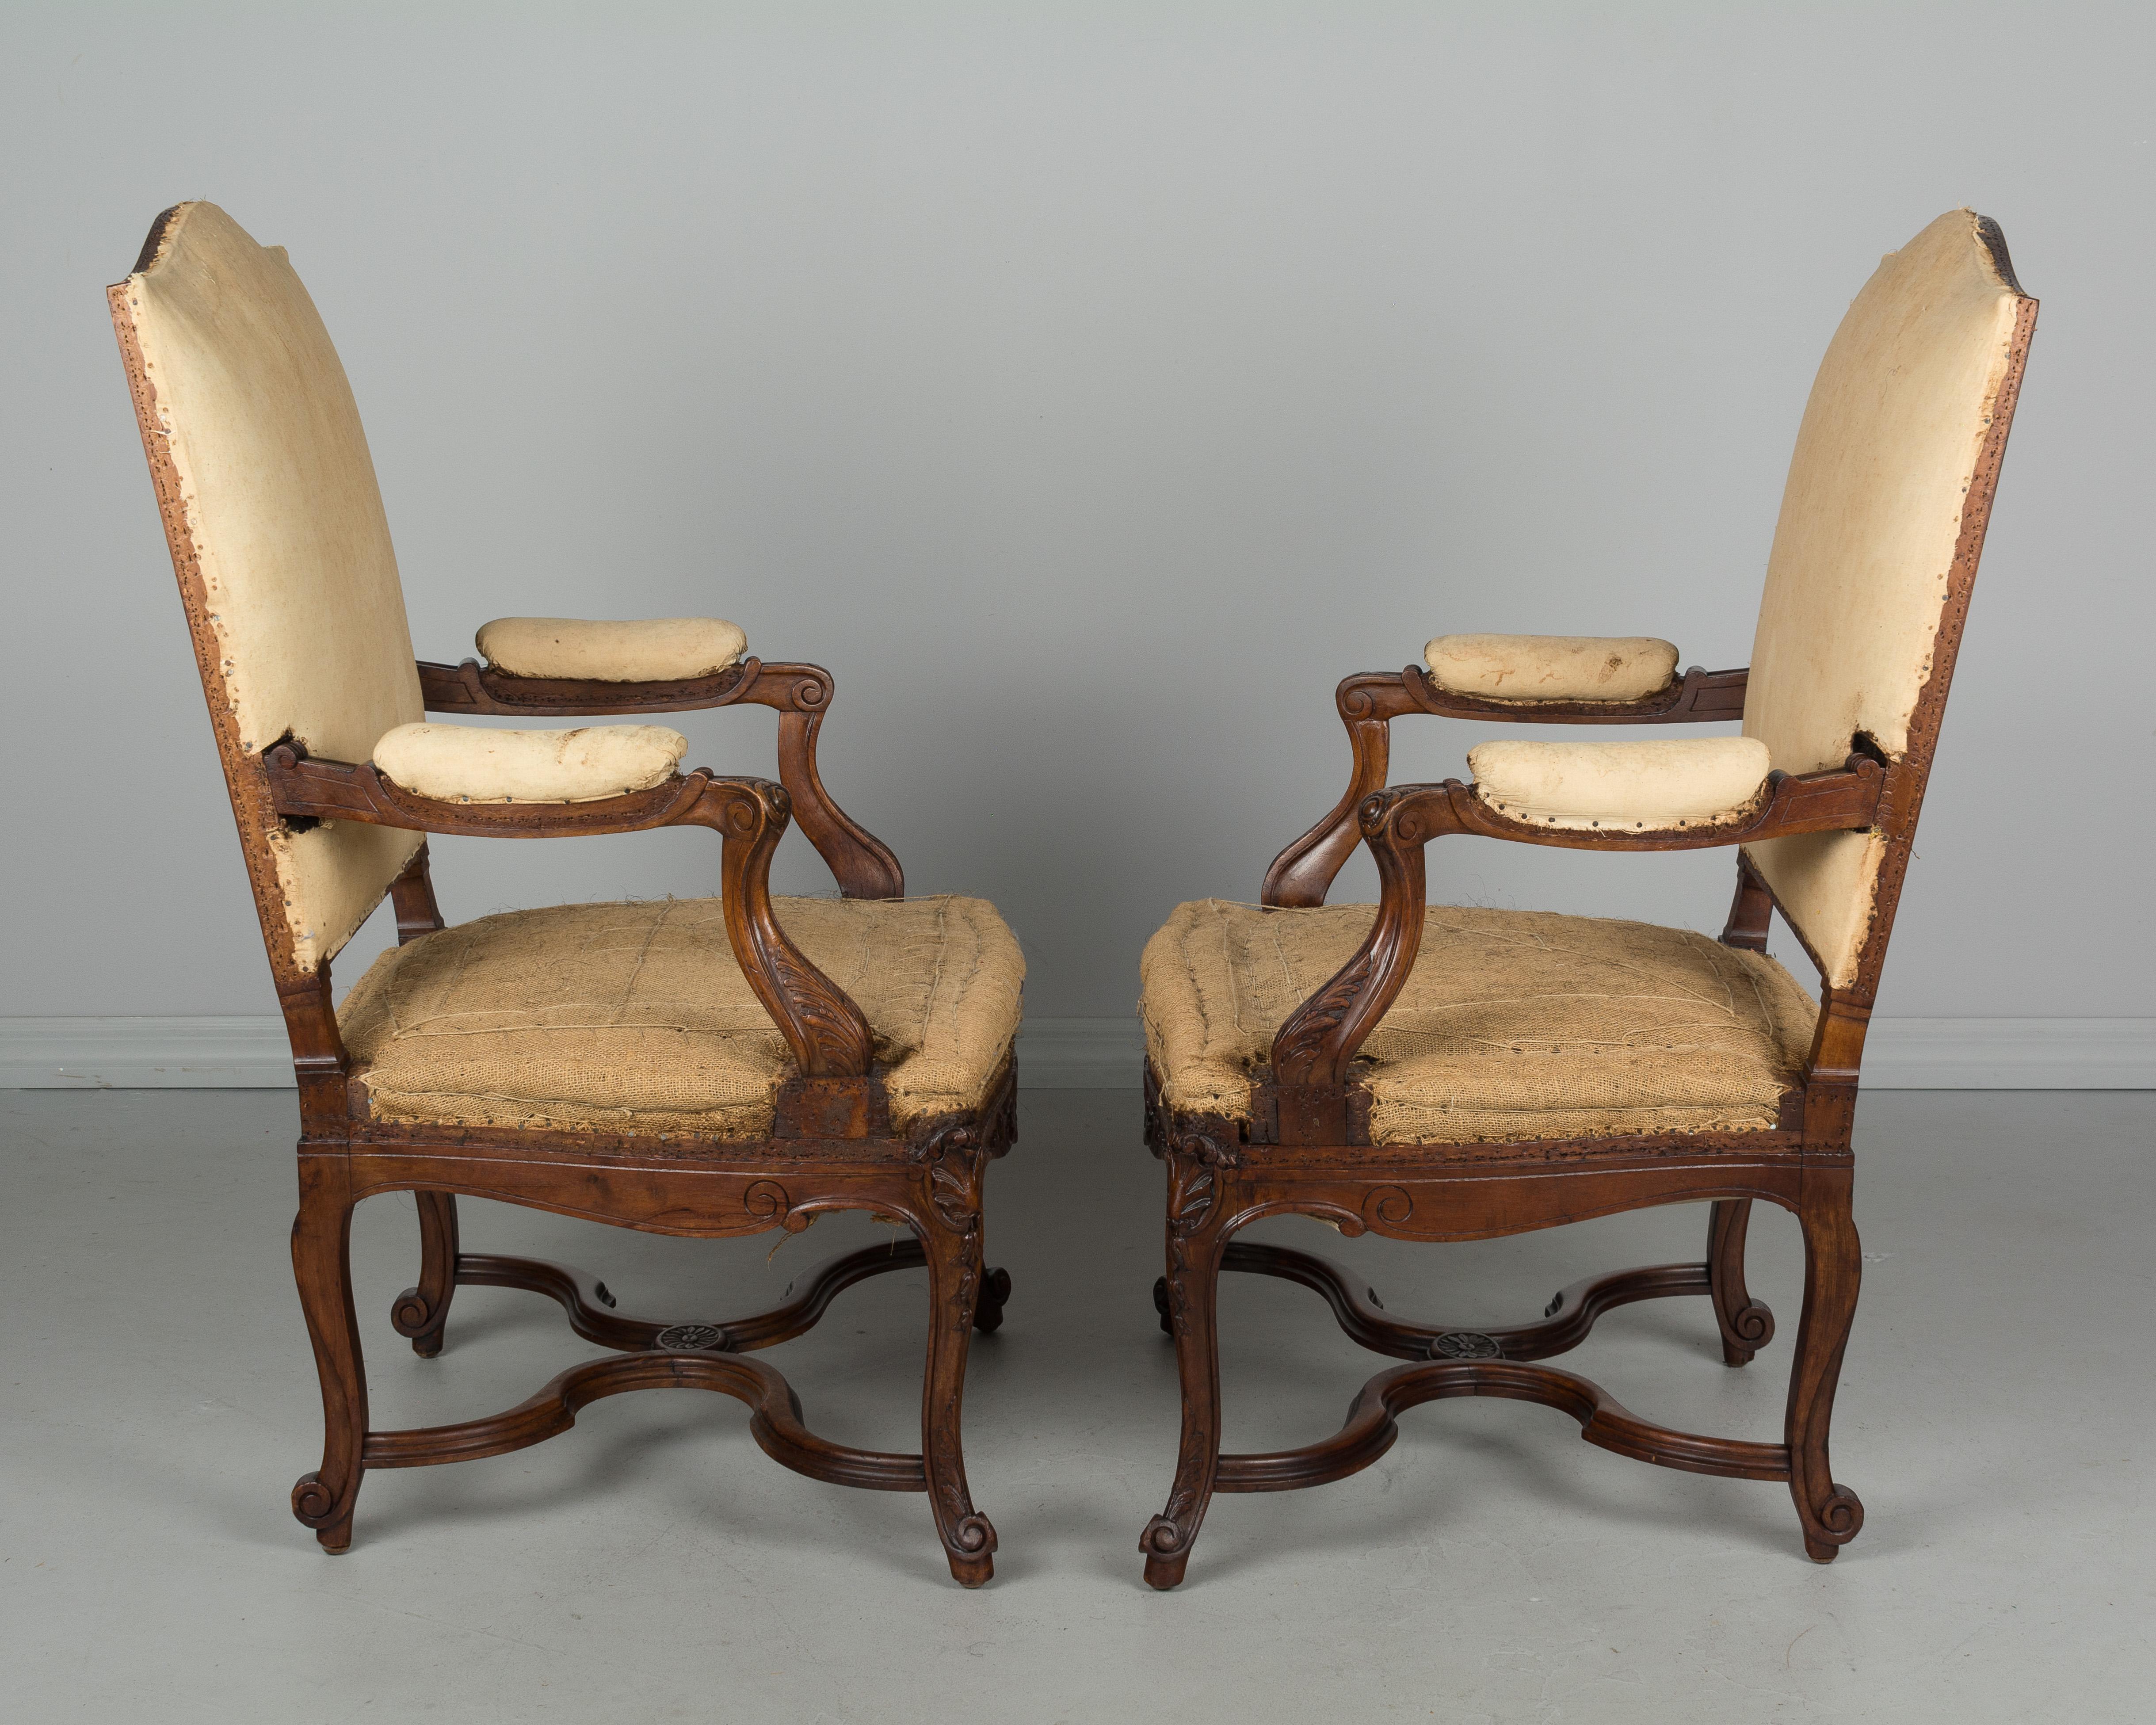 20th Century Pair of French Regency Style Fauteuils